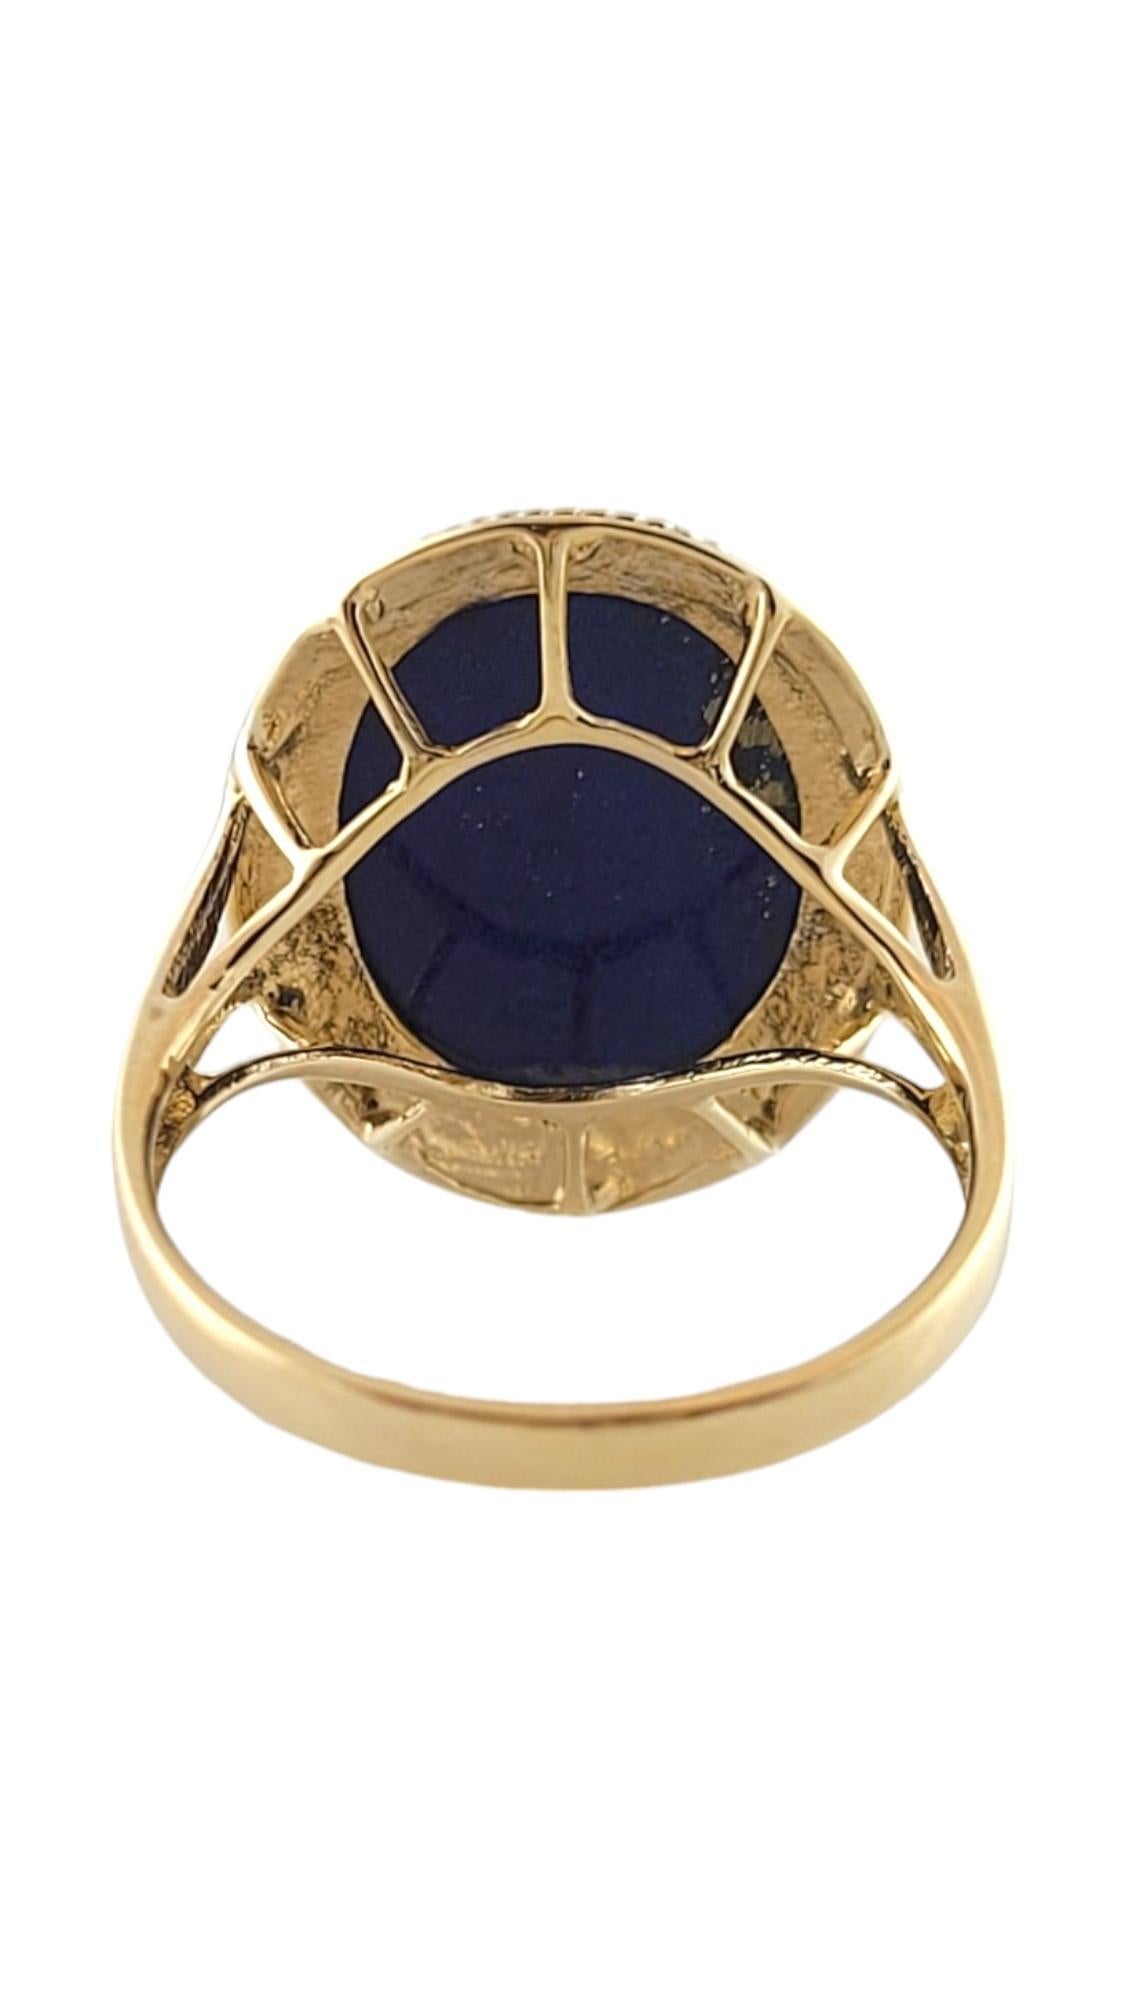 14K Yellow Gold Oval Blue Lapis Ring Size 7.25 #17376 In Good Condition For Sale In Washington Depot, CT